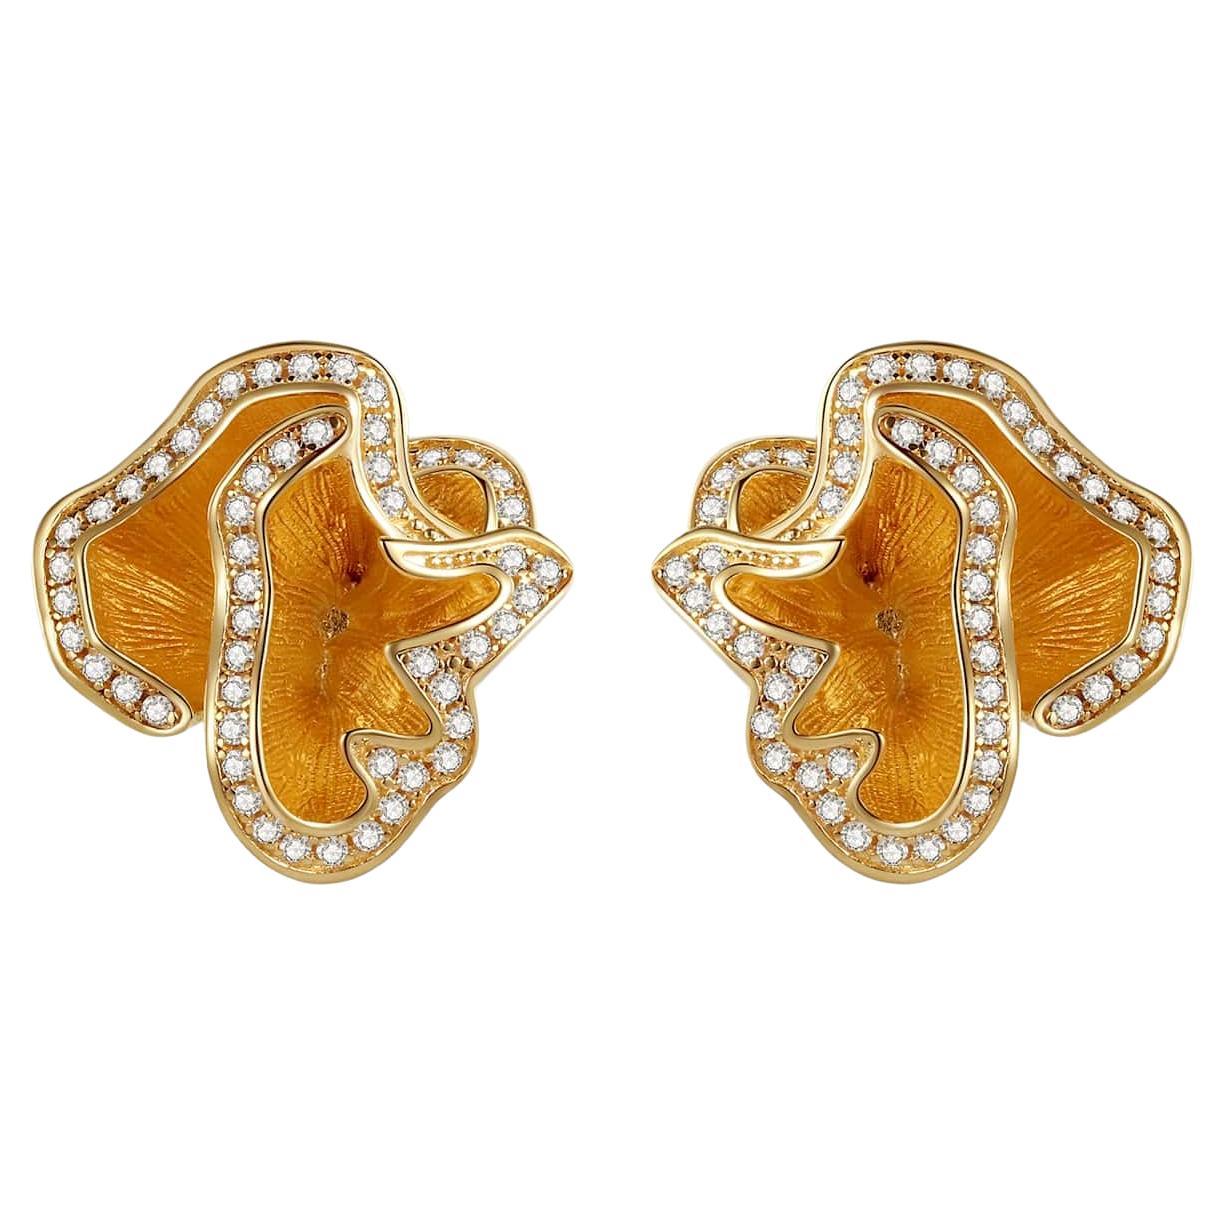 Quintessence Gold Small Flower Ear Stud For Sale